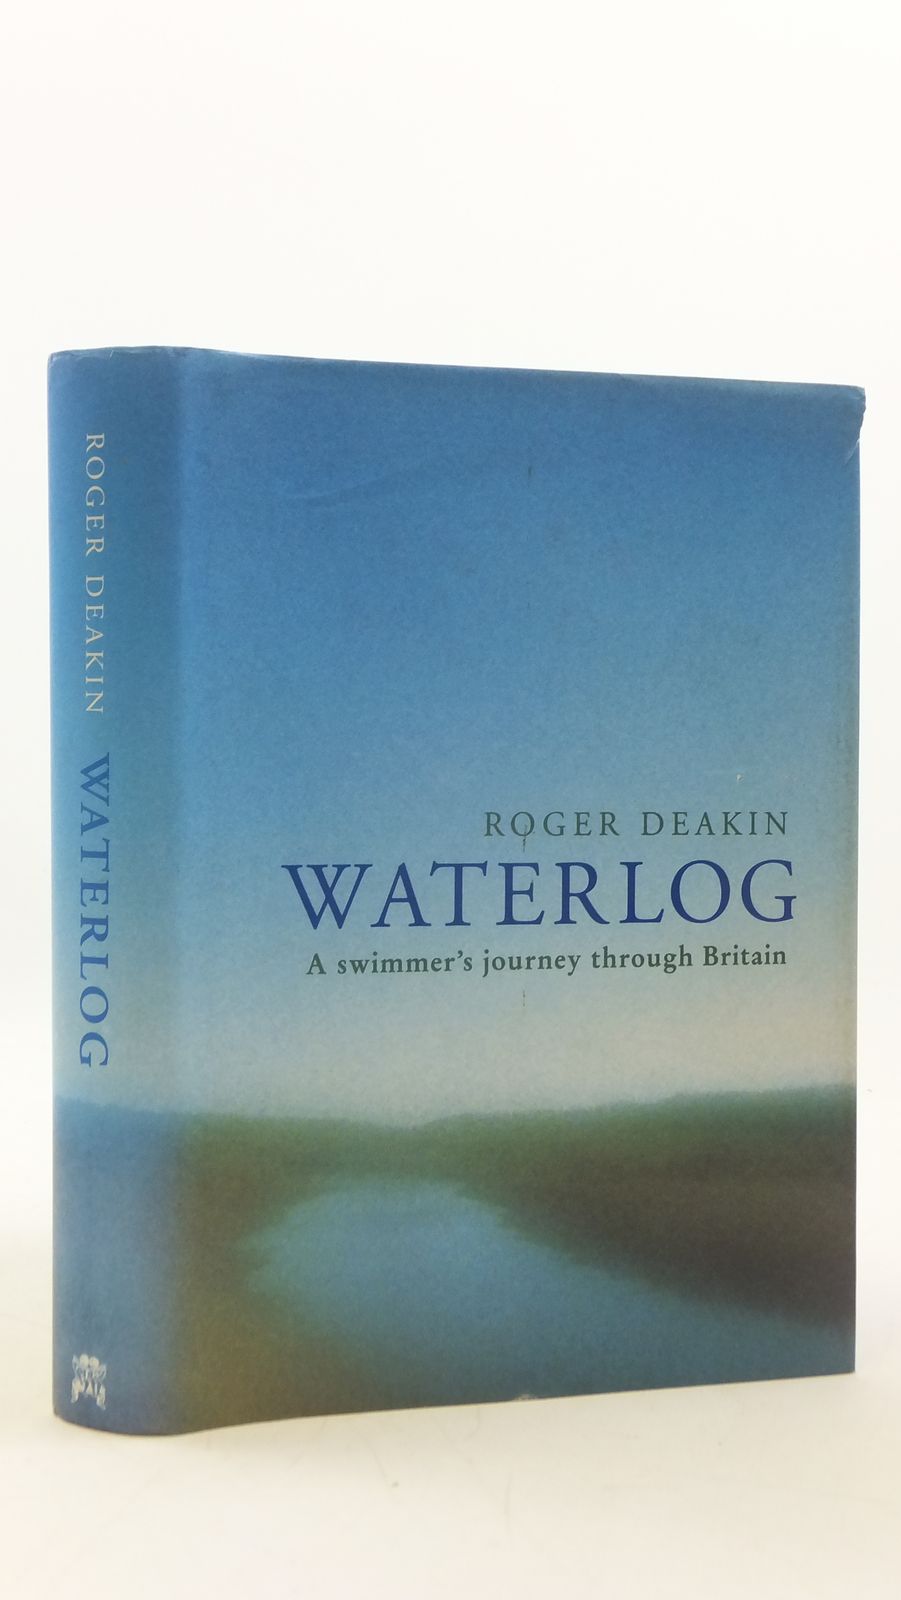 Photo of WATERLOG A SWIMMER'S JOURNEY THROUGH BRITAIN- Stock Number: 2111631